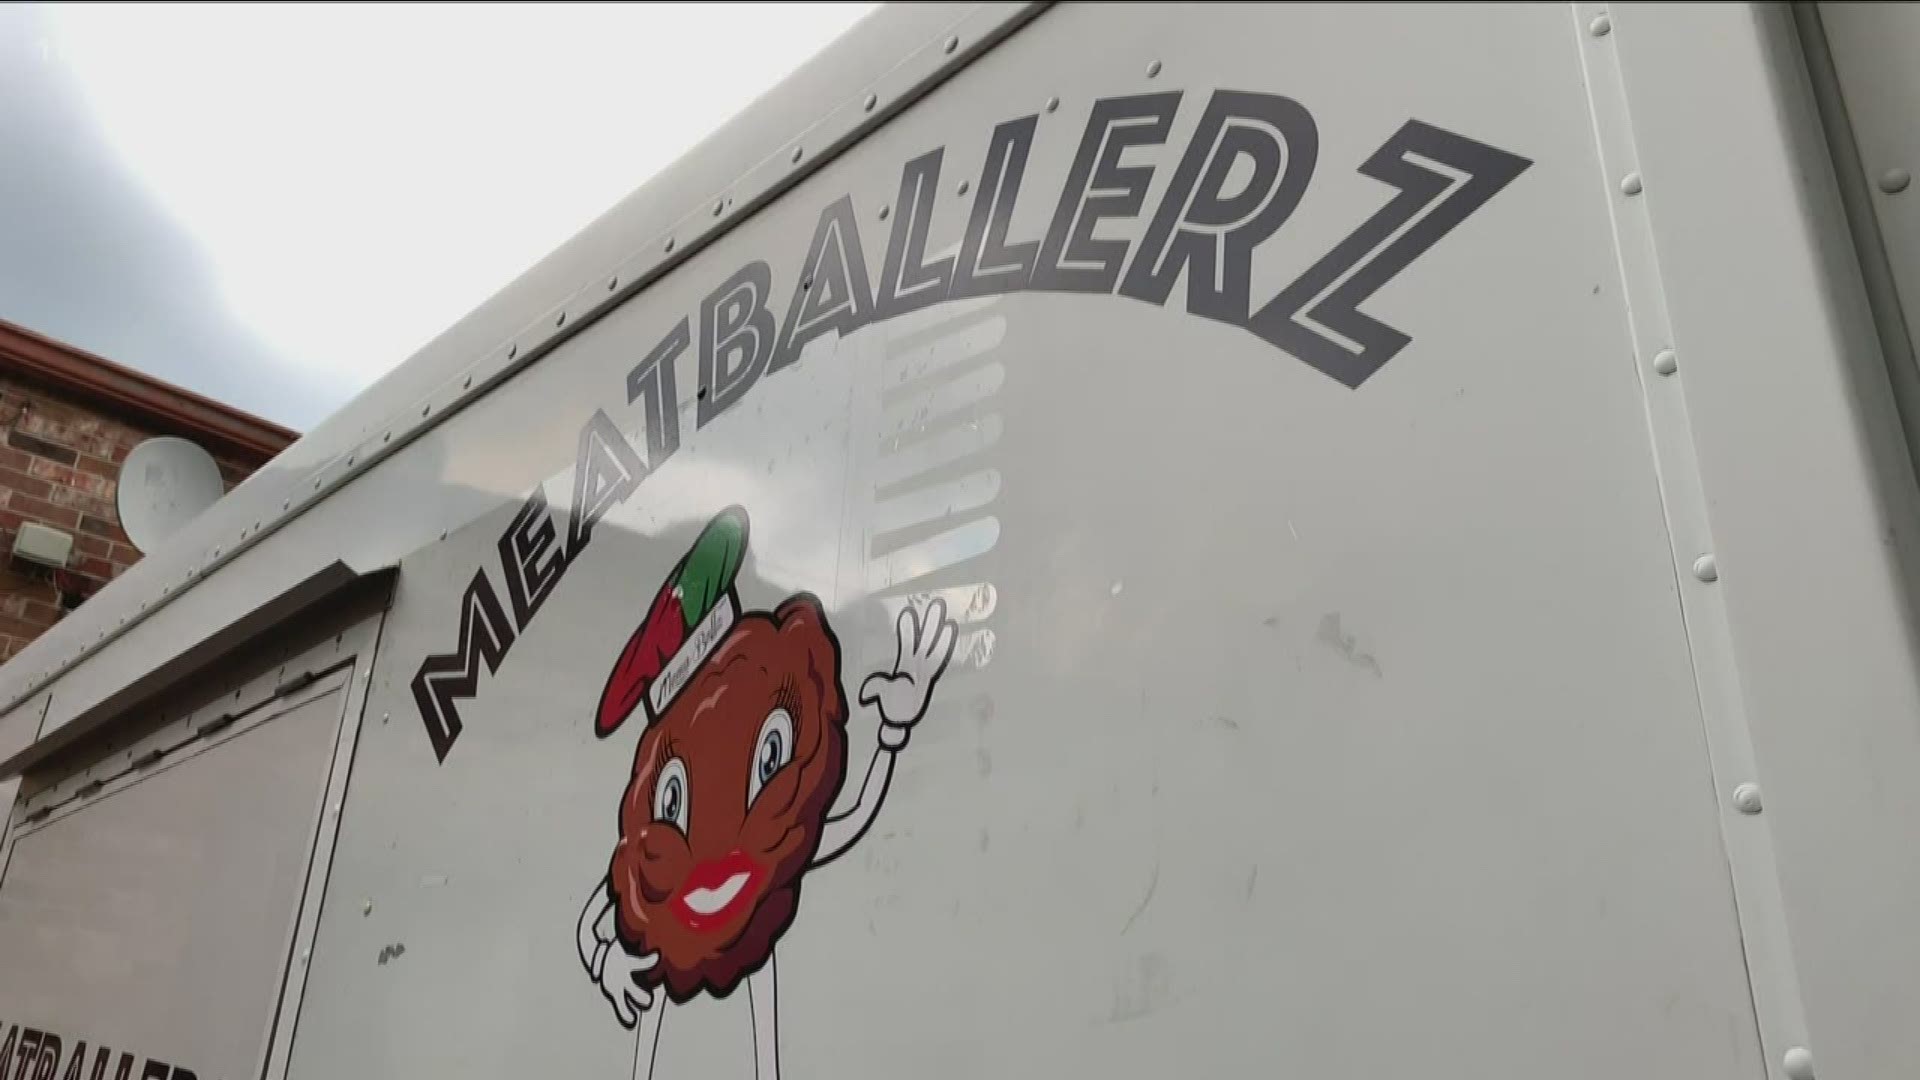 The Meatballerz food truck was stolen. Two days later, a man saw the truck behind his work and called the number on the side.